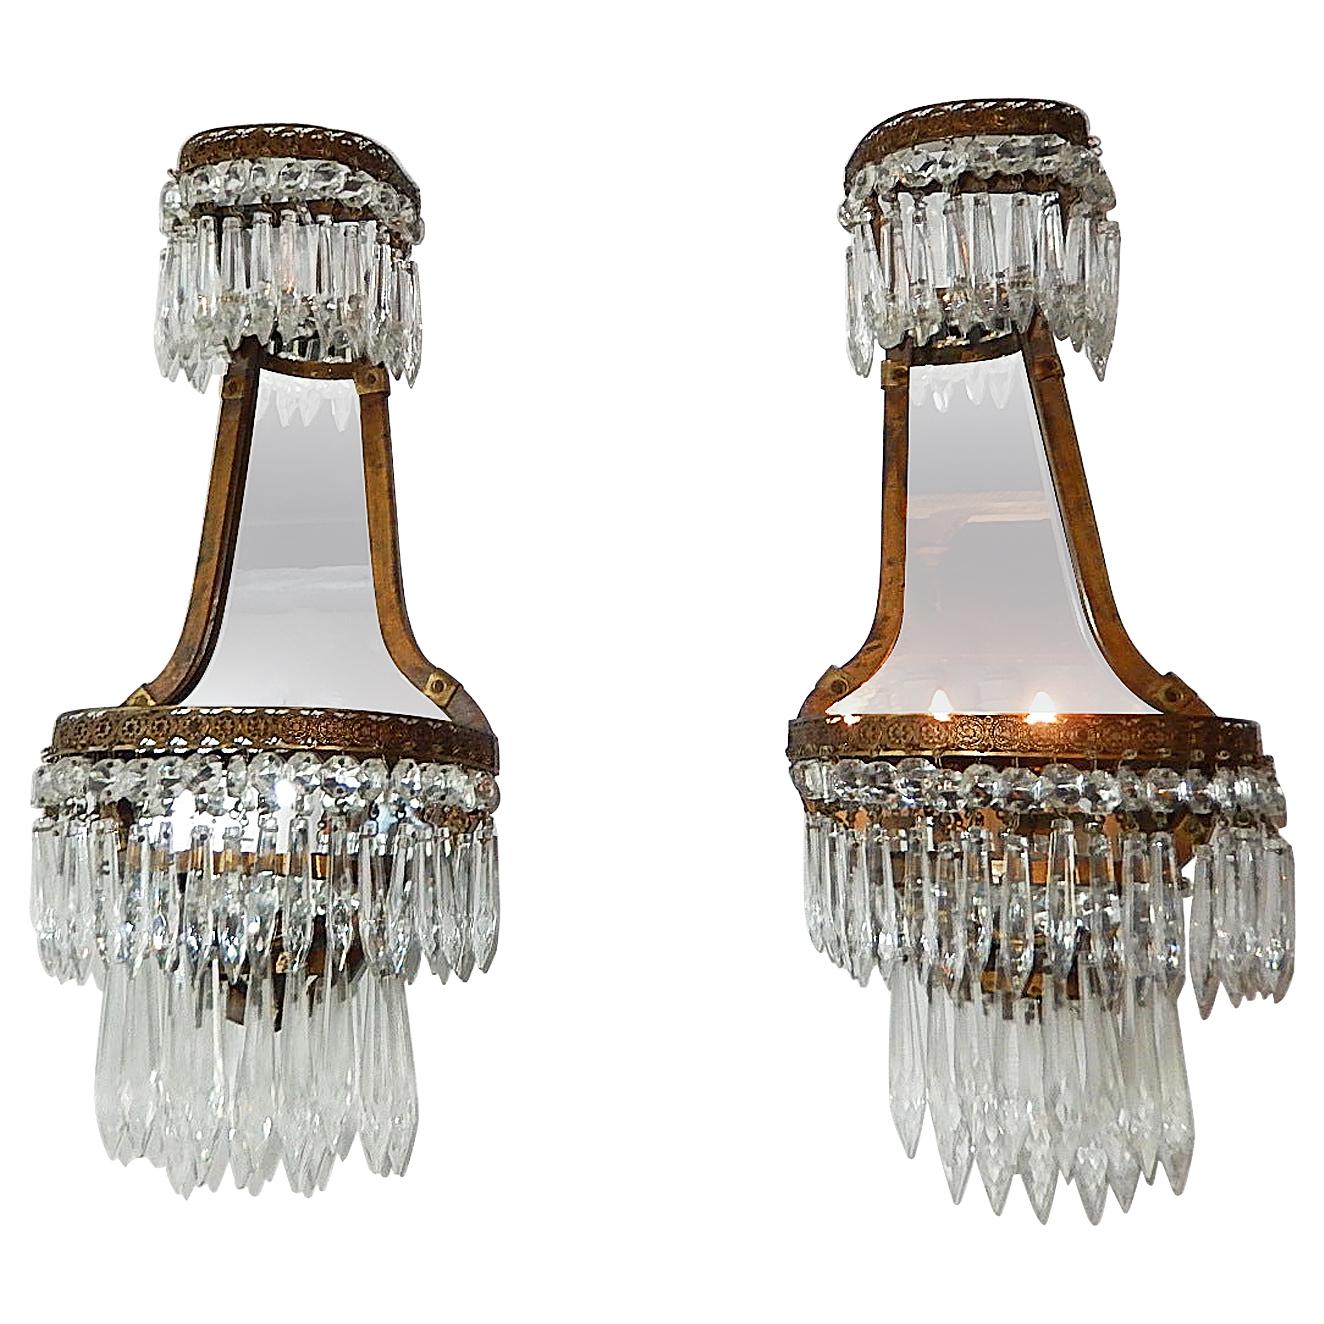 French Empire Crystal Prism with Mirrors Sconces, circa 1900